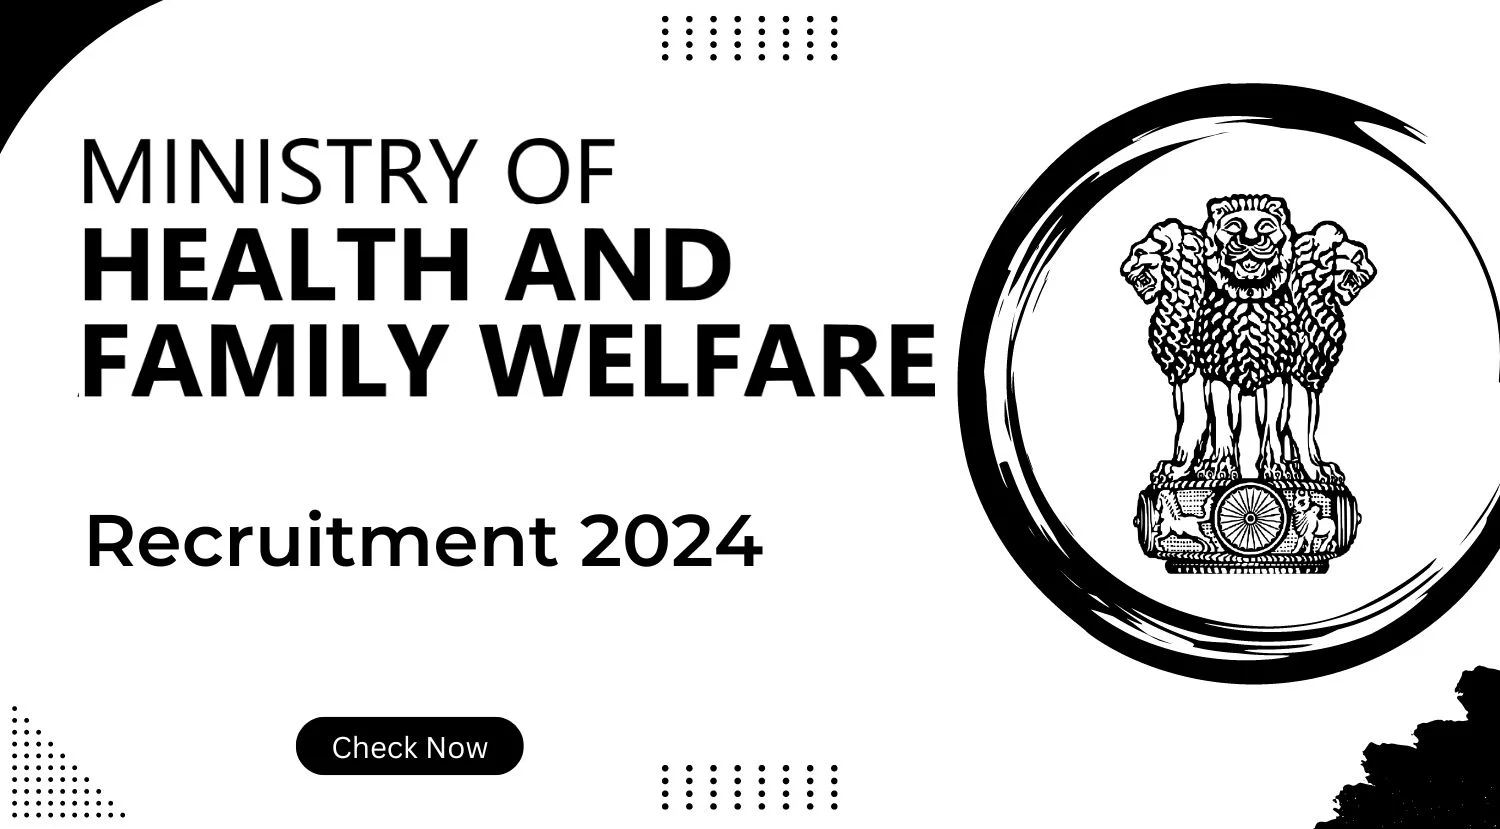 MOhfw The Ministry of Health and Family Welfare